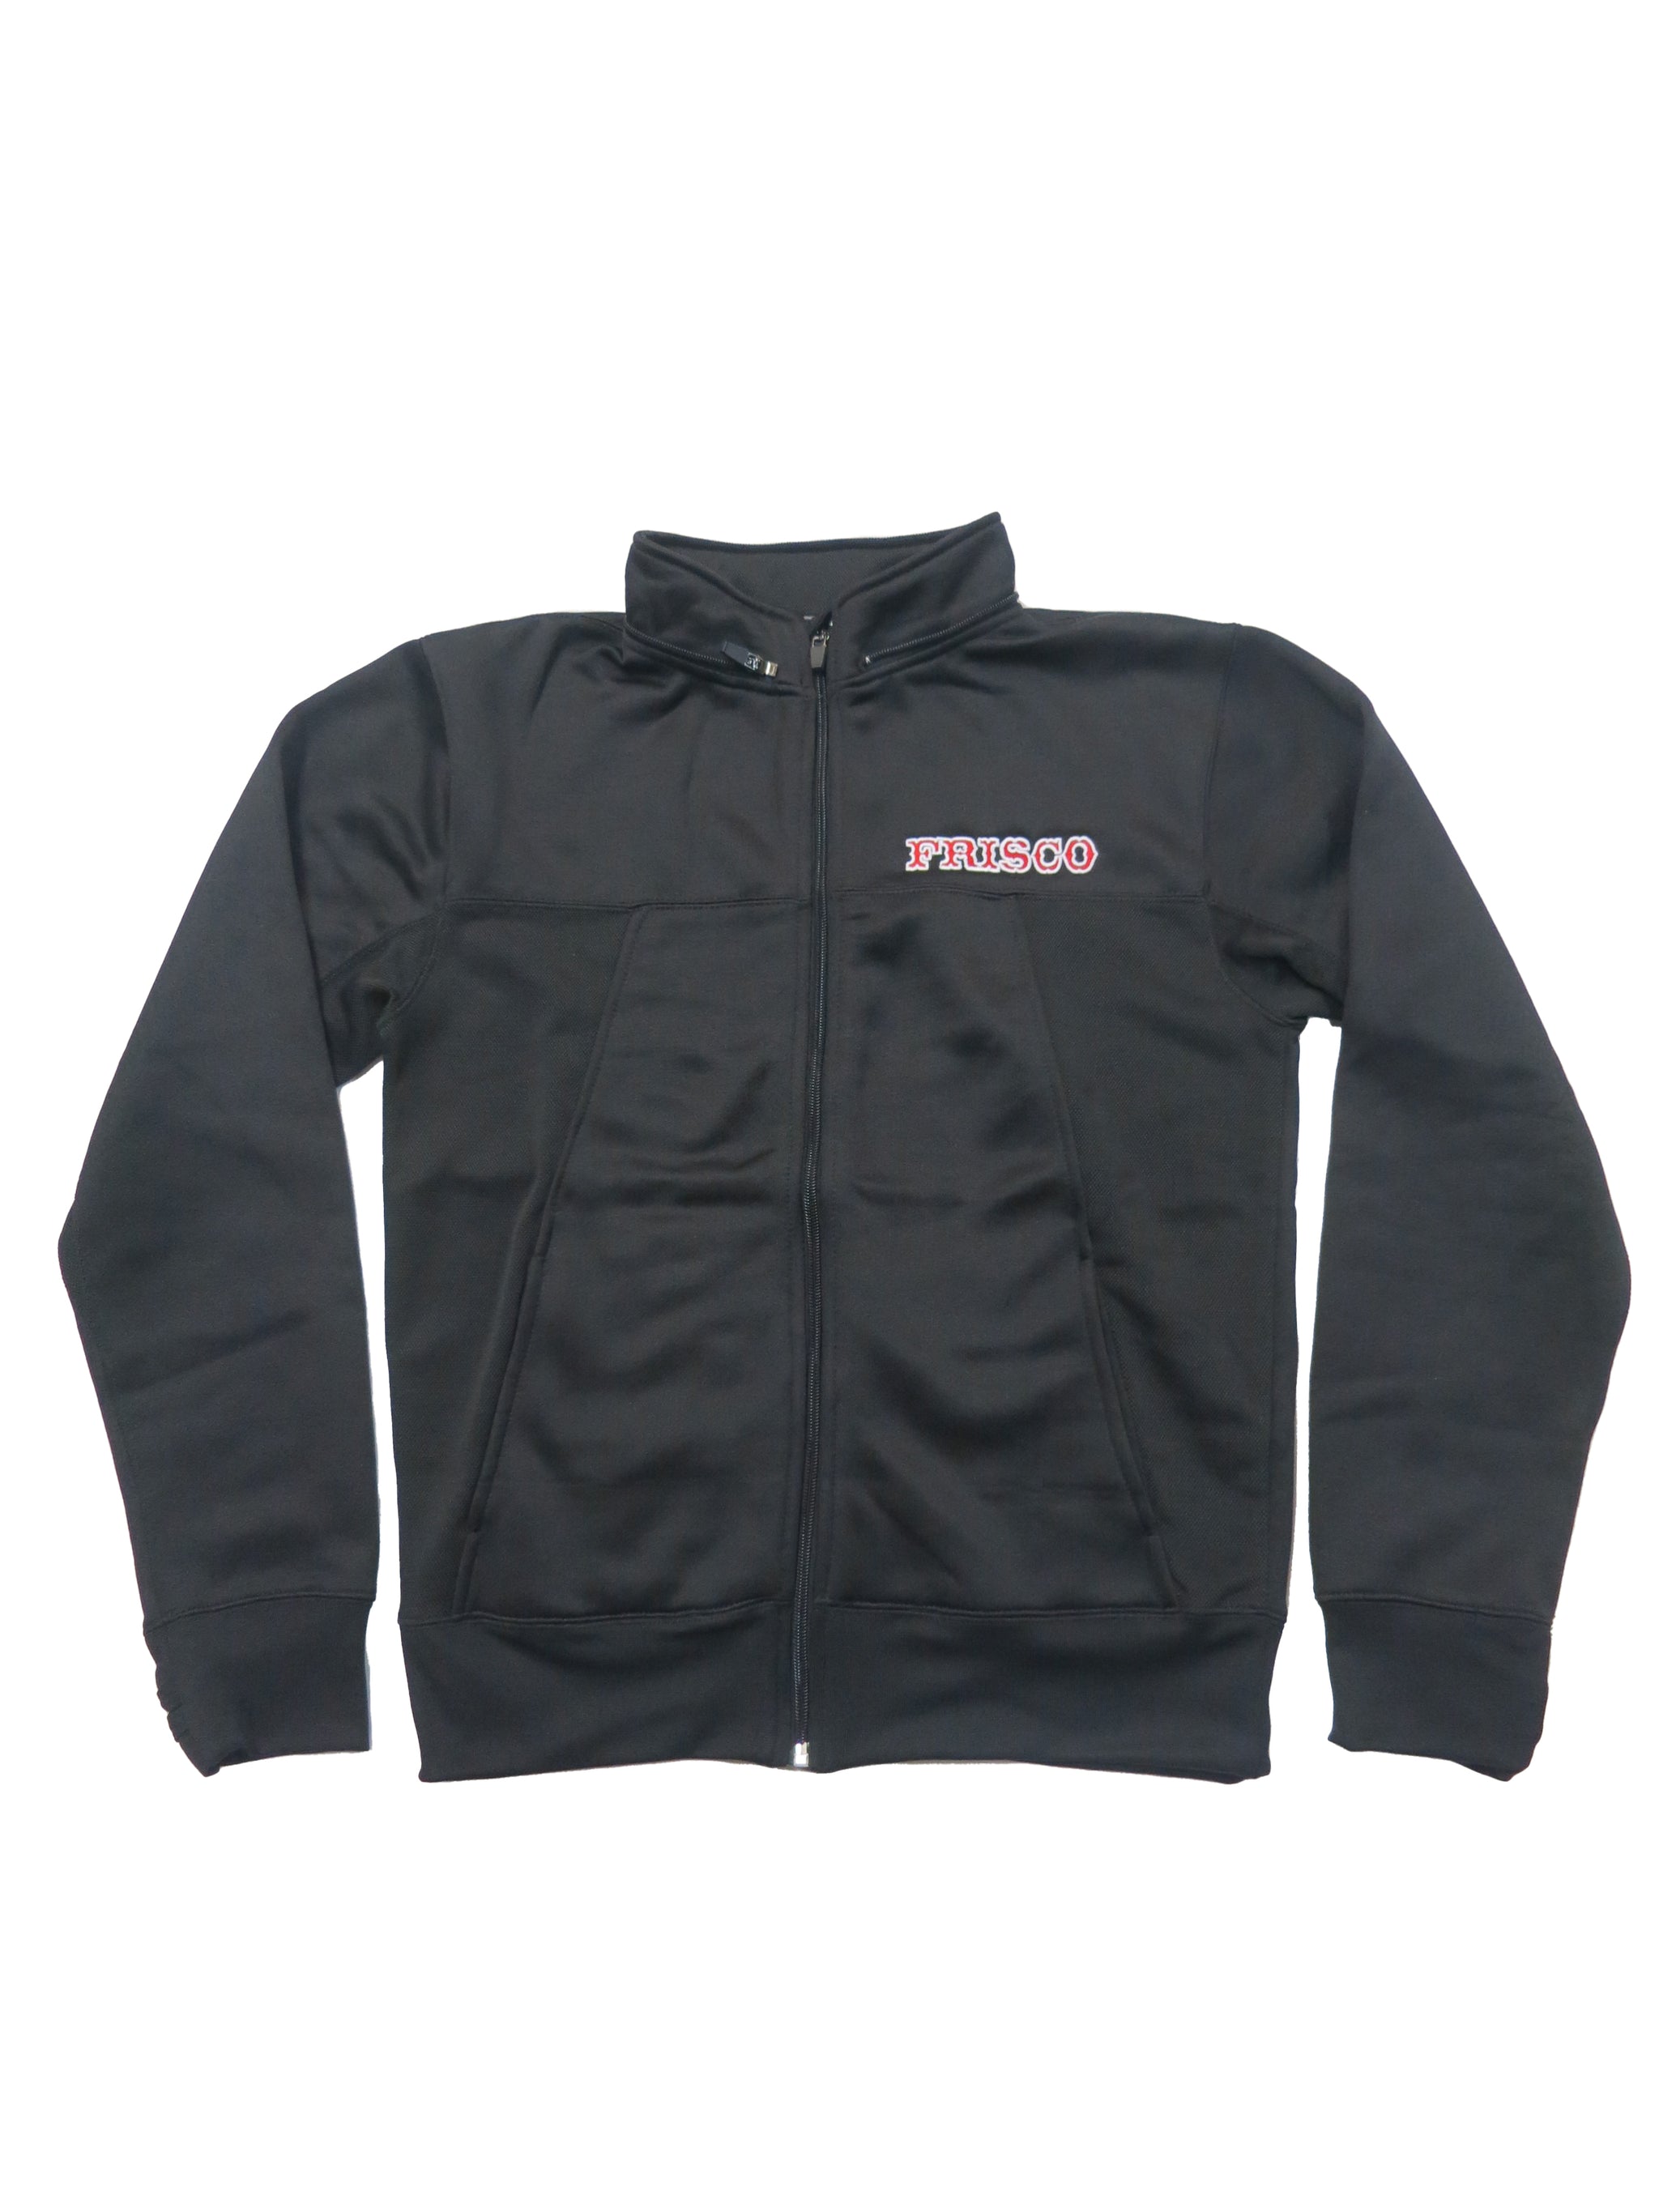 Frisco Hooded Zipper Sweatshirt with Removable Hood - 415 Clothing